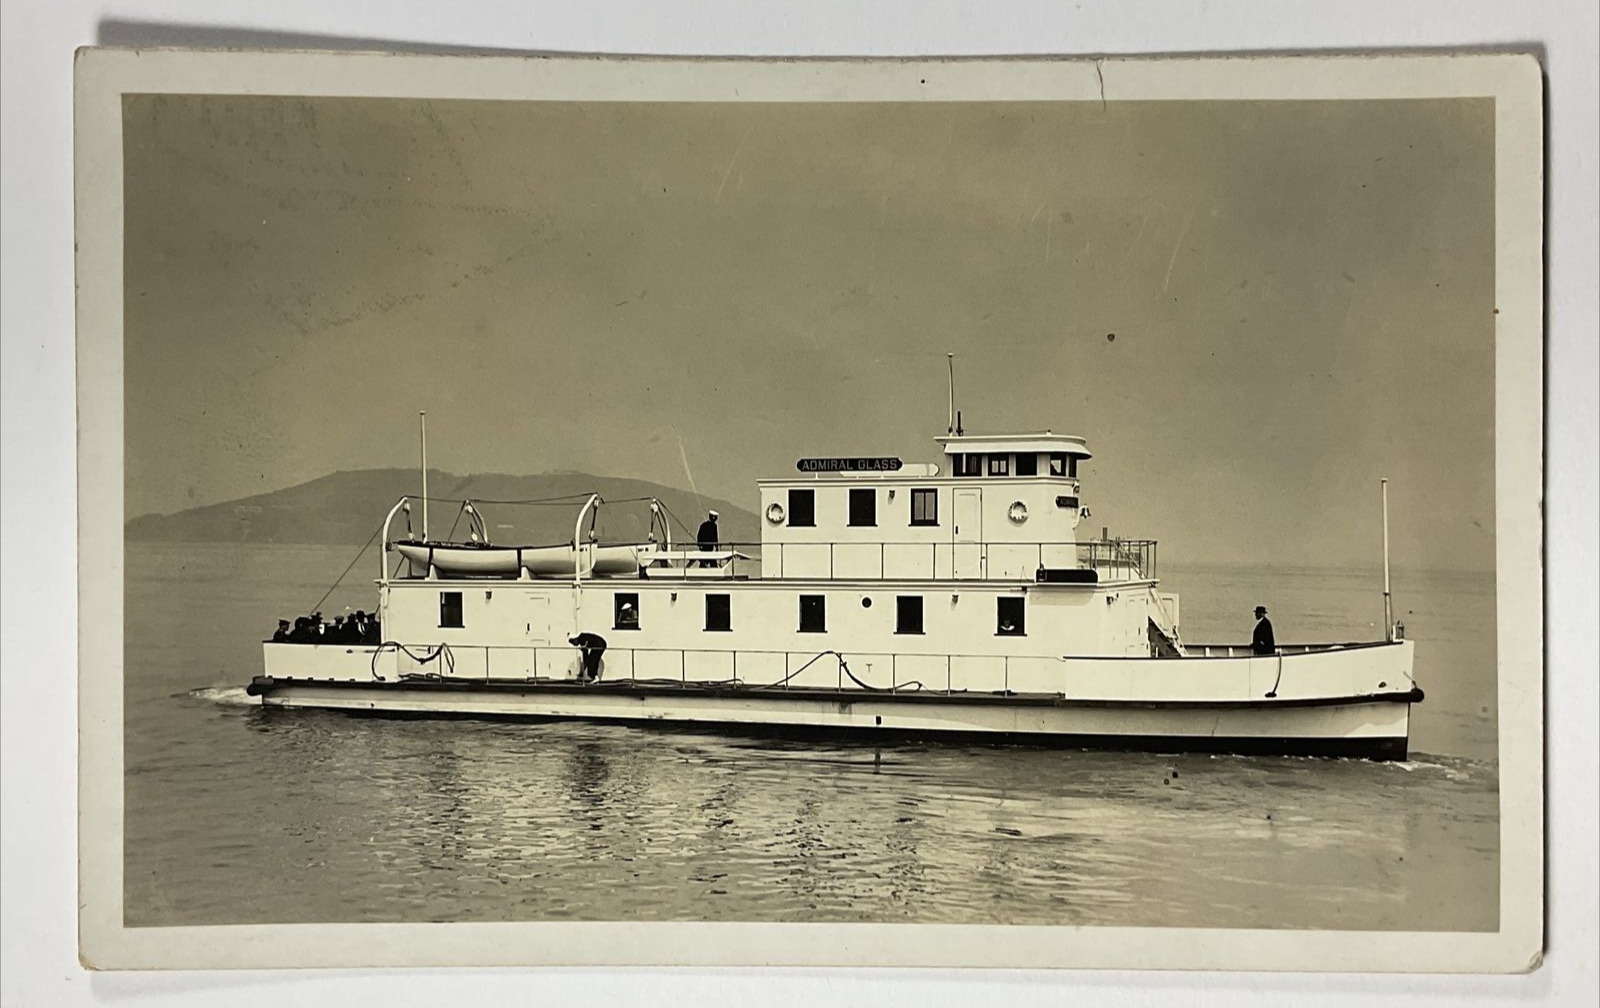 c 1920 USS Admiral Glass Steamer Ferry Real Photo Postcard RPPC Henry Glass